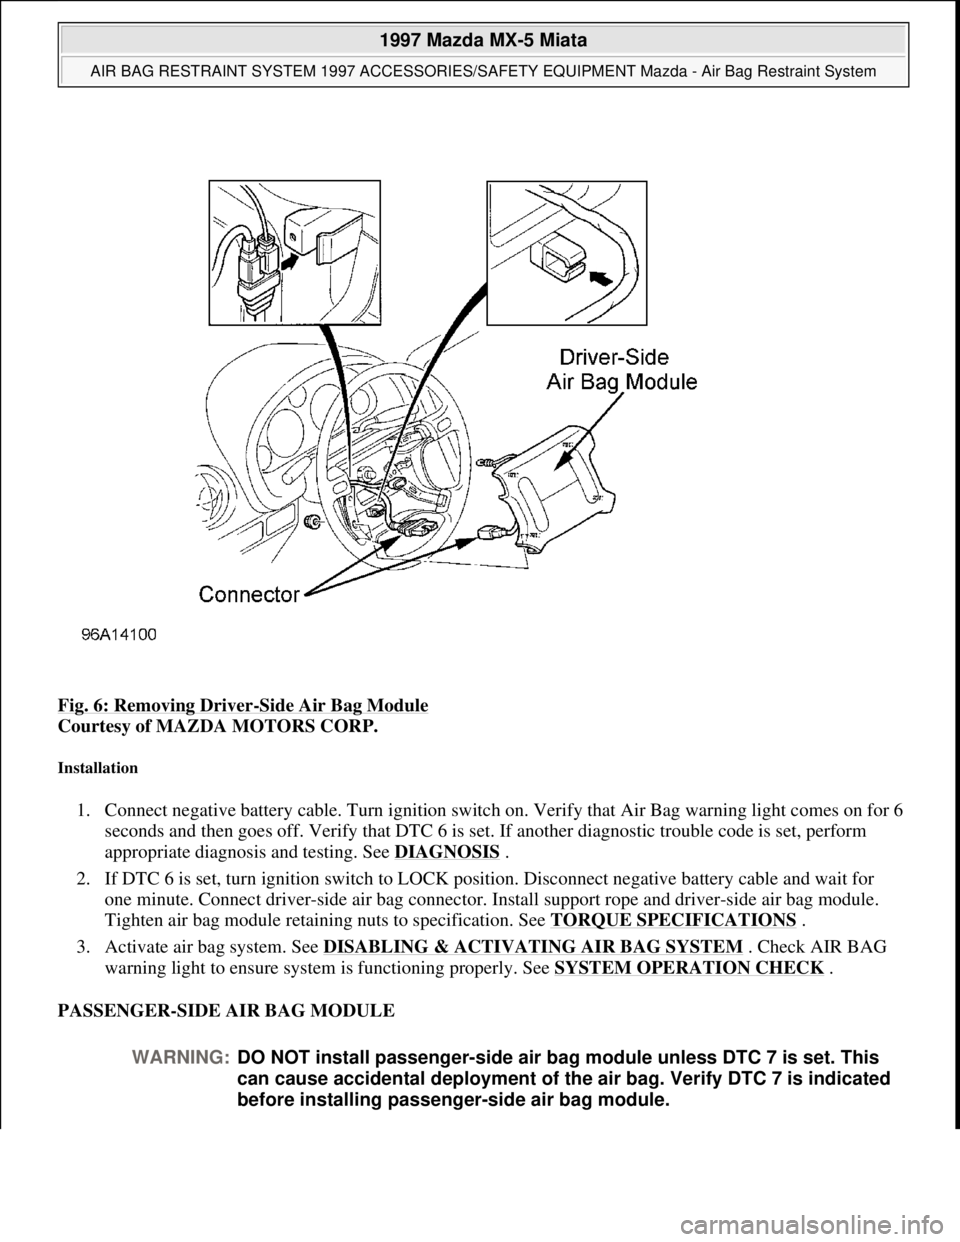 MAZDA MIATA 1997  Factory Repair Manual Fig. 6: Removing Driver-Side Air Bag Module 
Courtesy of MAZDA MOTORS CORP.  
Installation 
1. Connect negative battery cable. Turn ignition switch on. Verify that Air Bag warning light comes on for 6